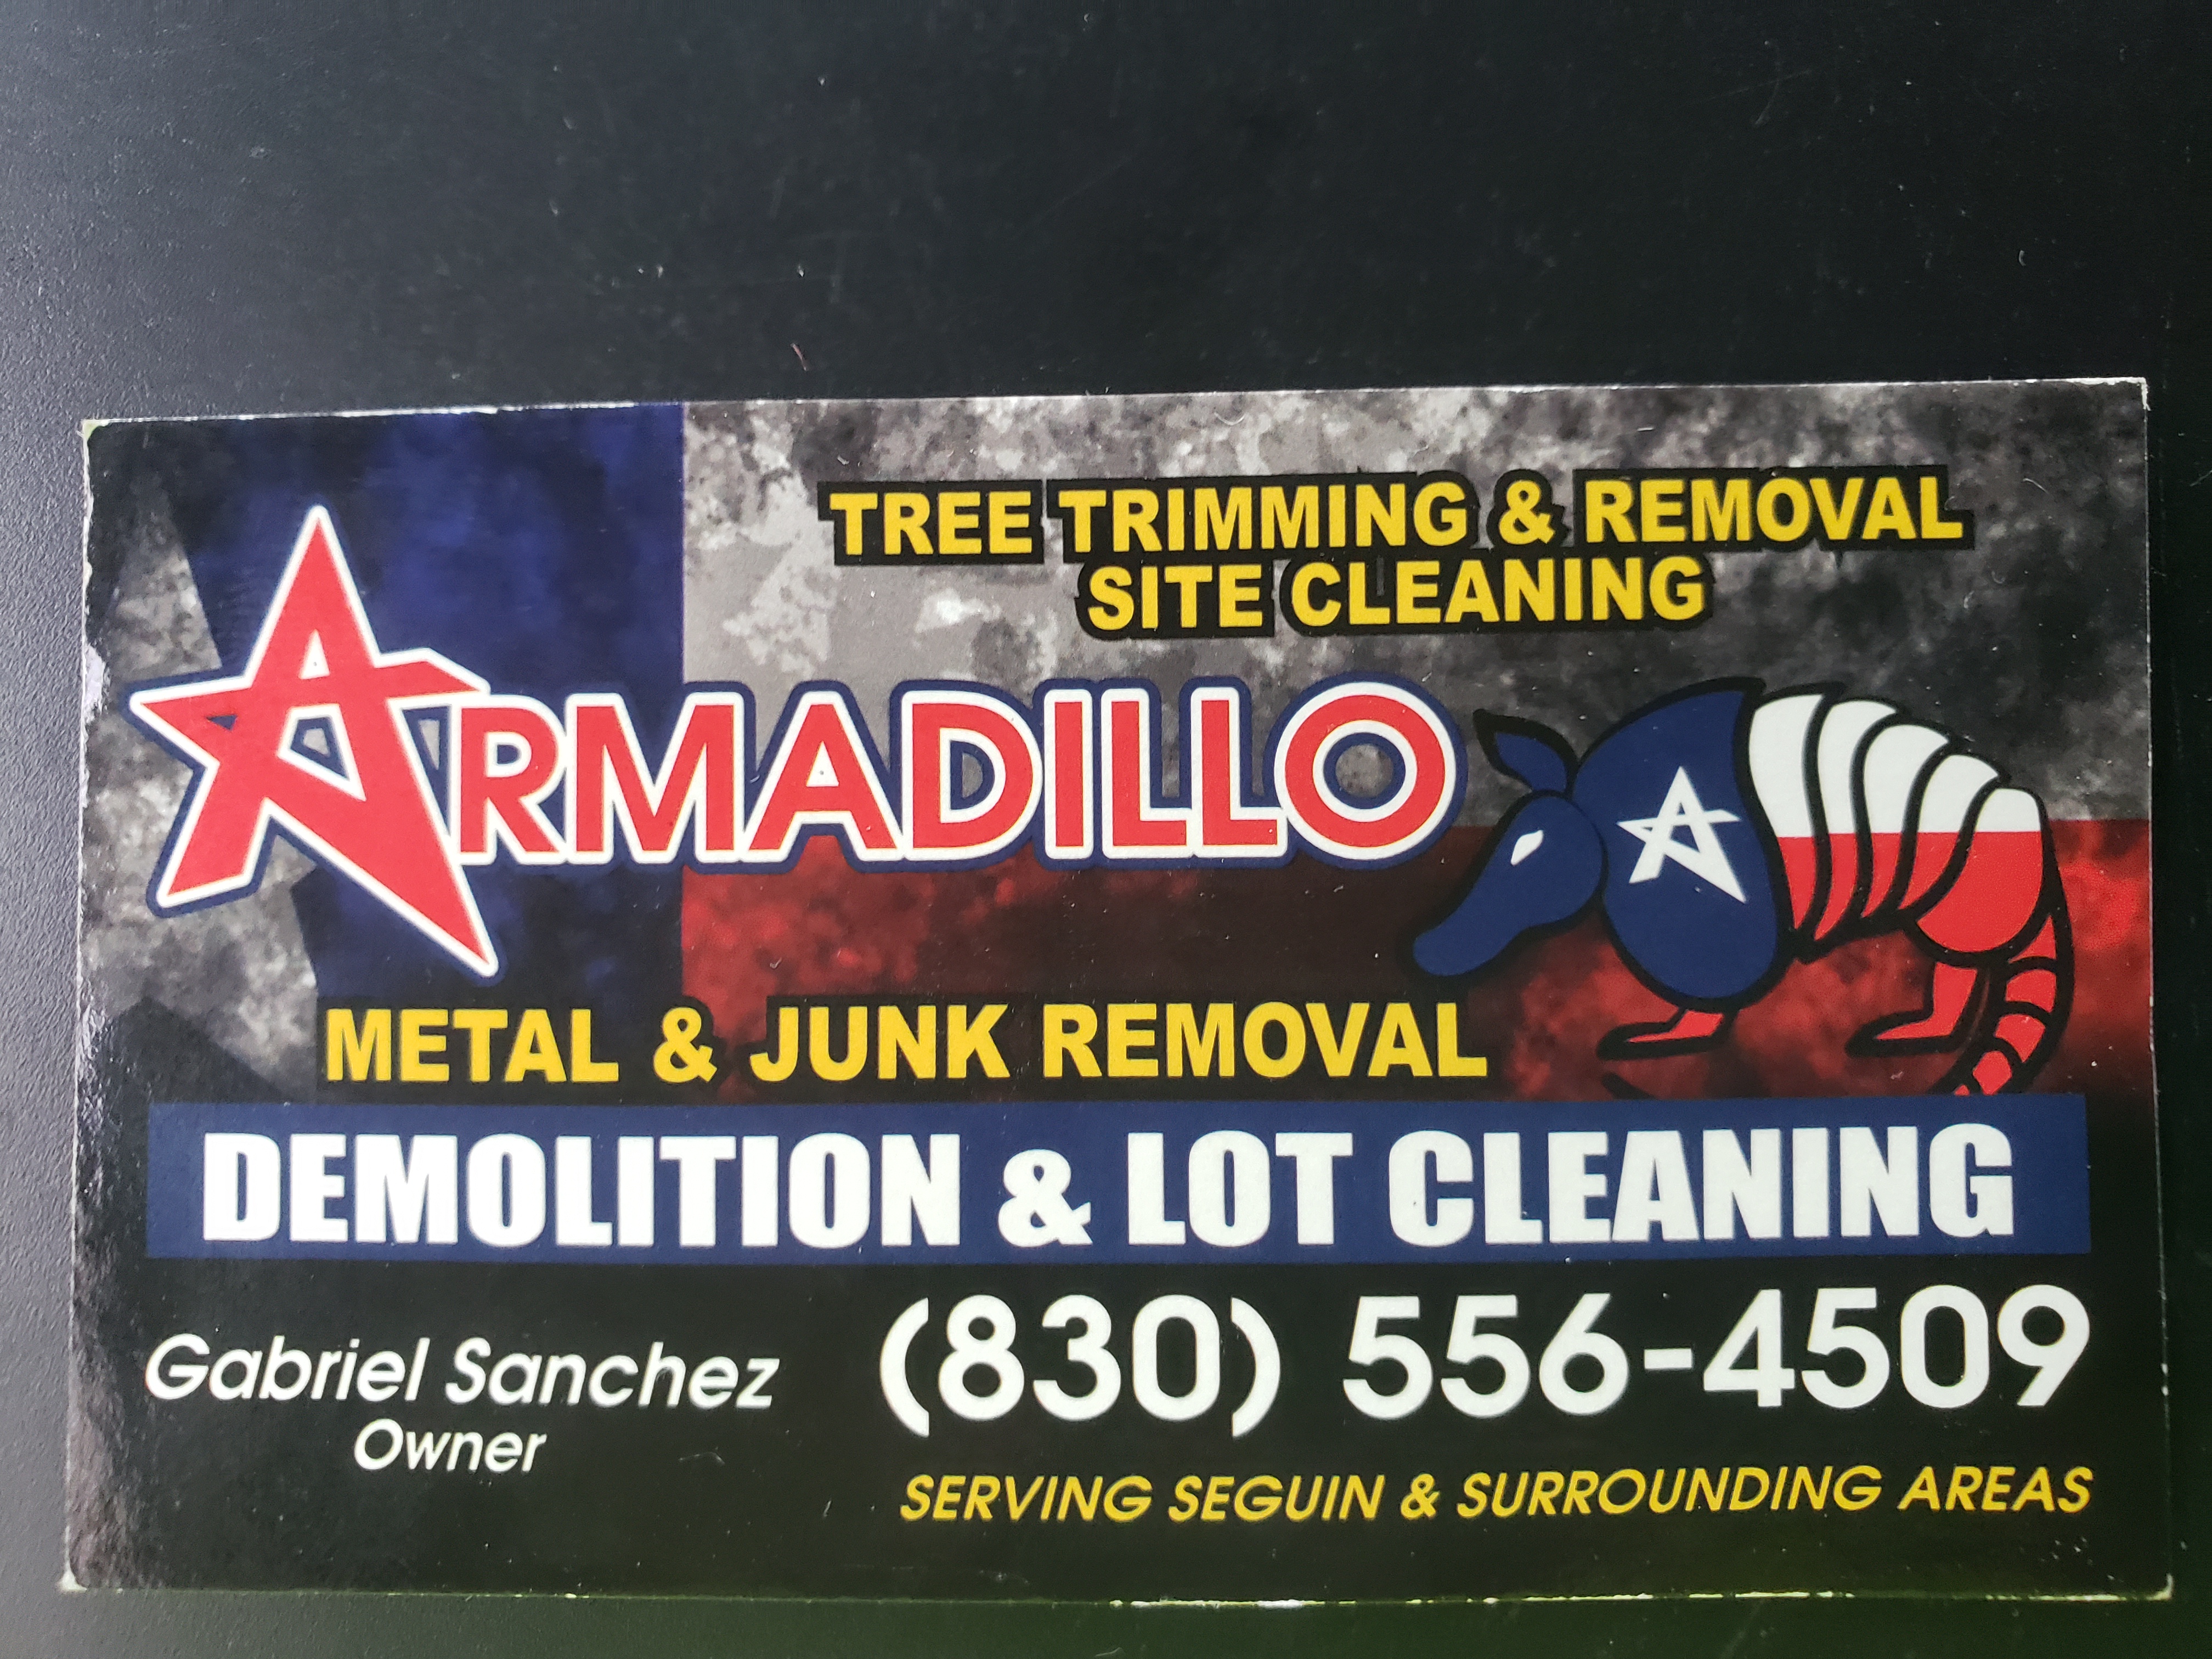 Armadillo Demo and Lot Cleaning, Metal and Junk Removal Logo